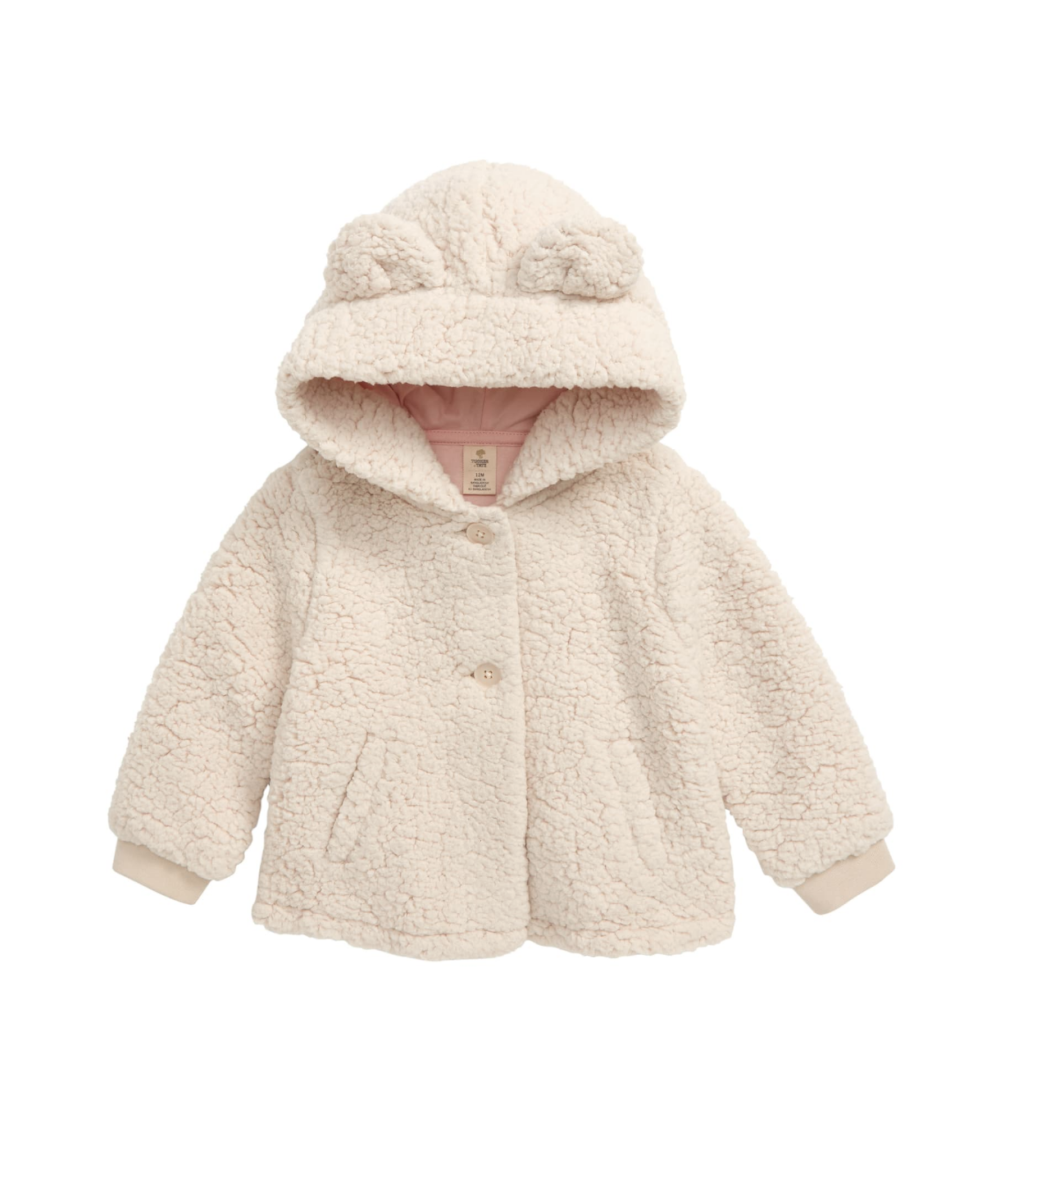 the miller affect baby teddy jacket from the n sale